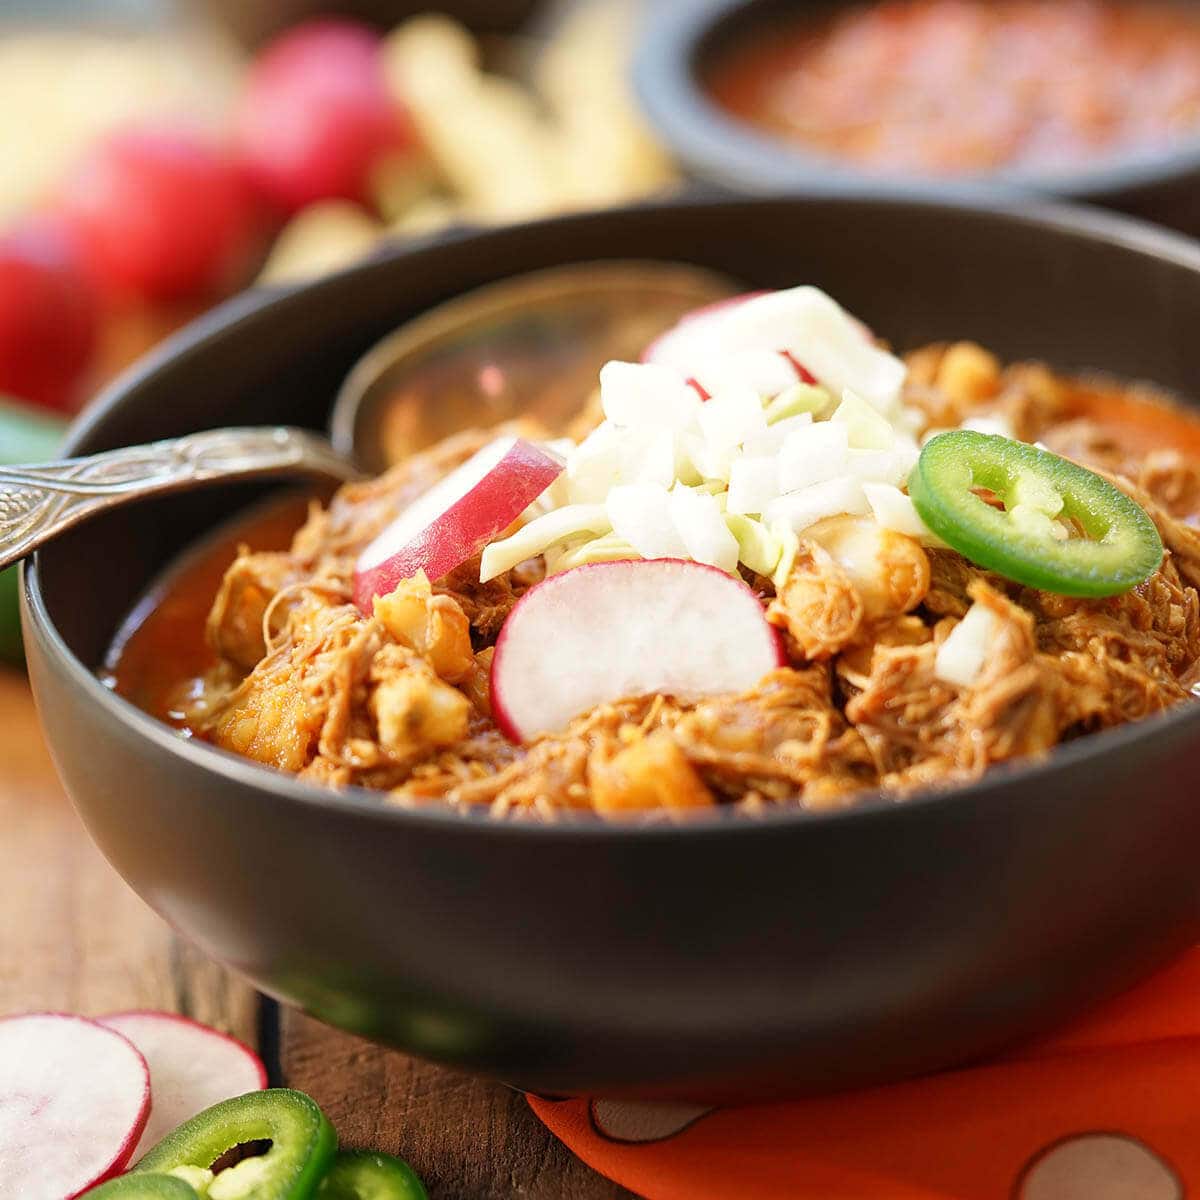 Authentic Posole Recipe in black bowl topped with onions, jalapeños and sliced radishes.